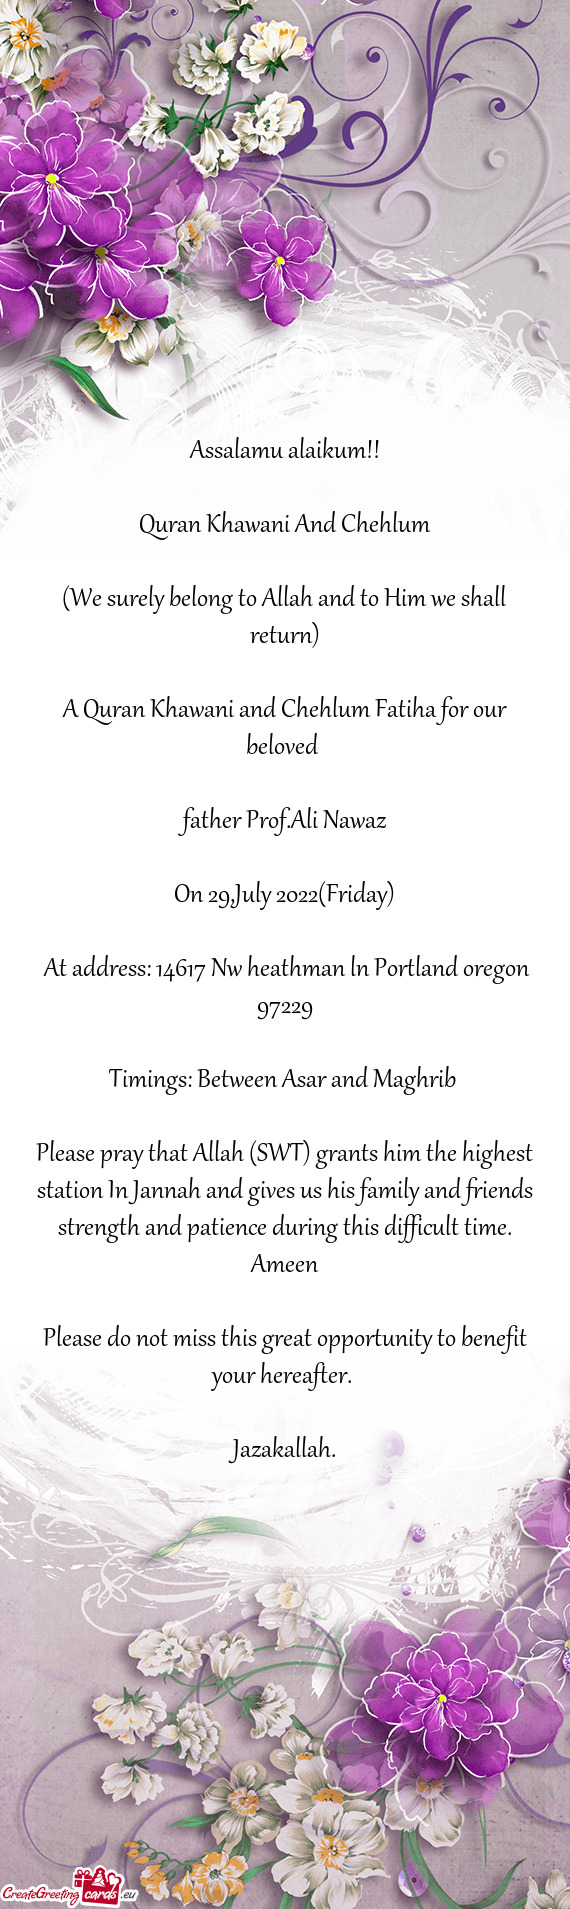 A Quran Khawani and Chehlum Fatiha for our beloved